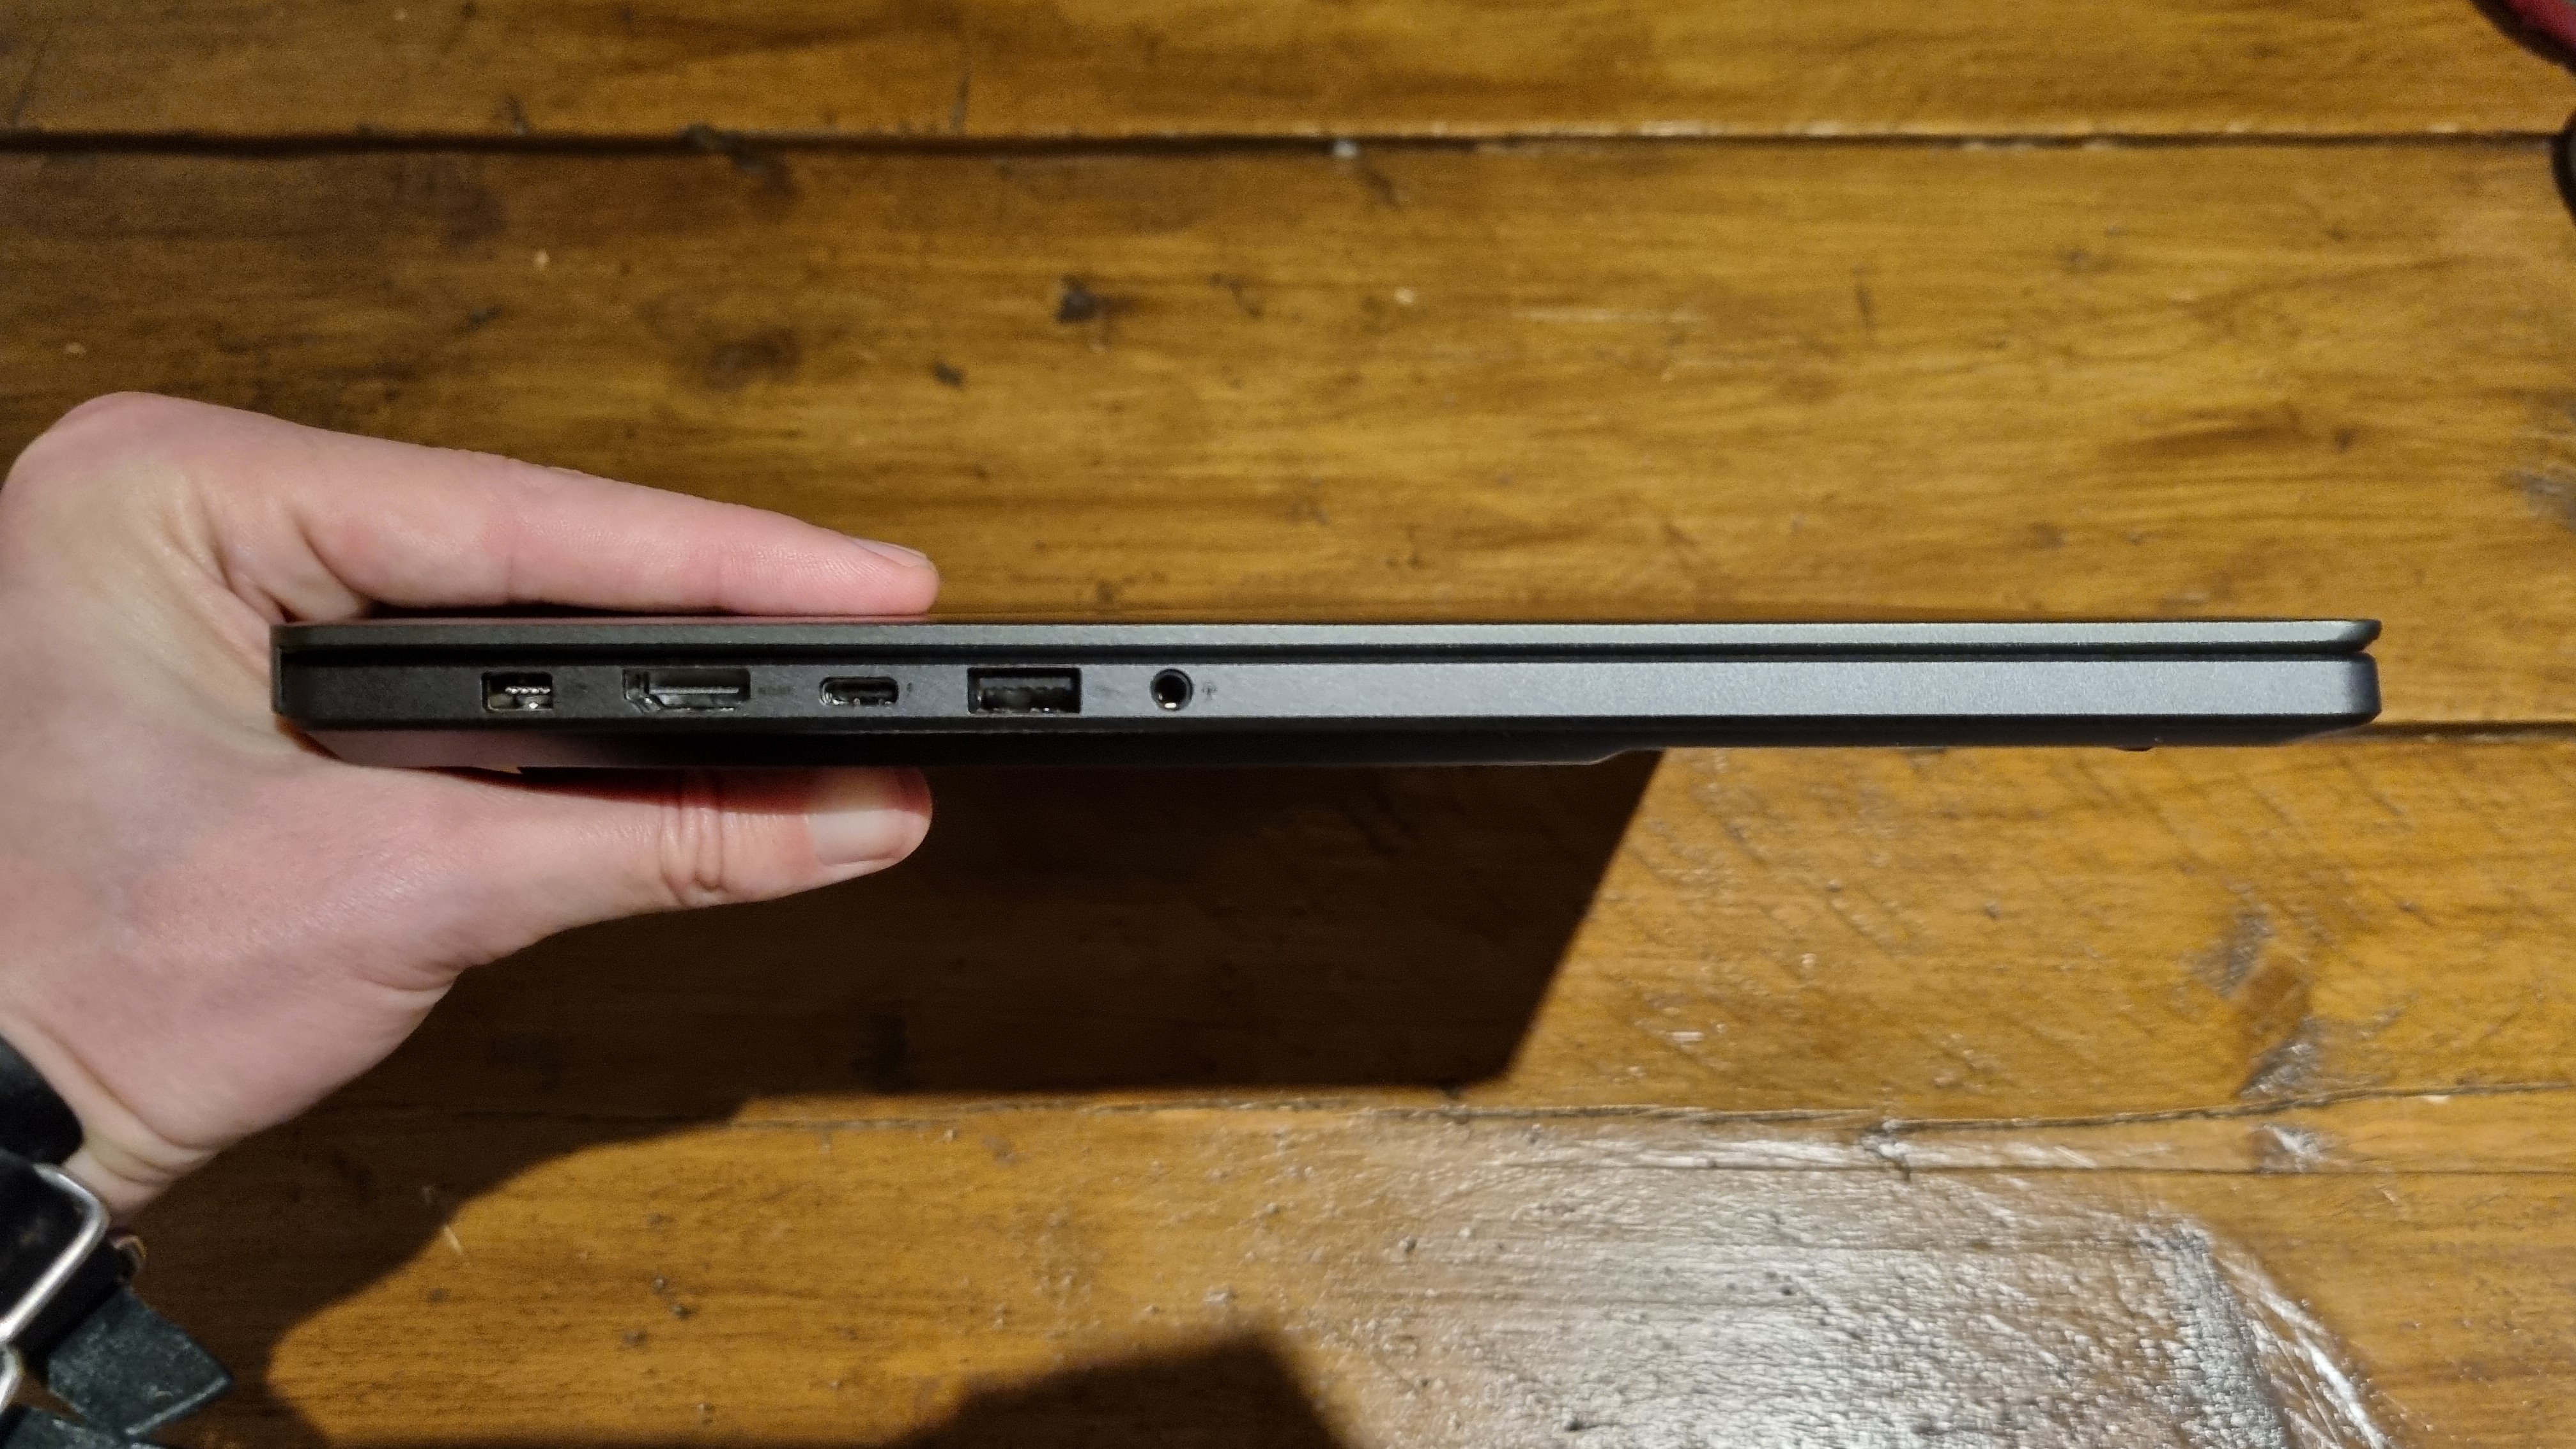 The Asus ROG Zephyrus G16 2024 held to show the thinness of the laptop overall